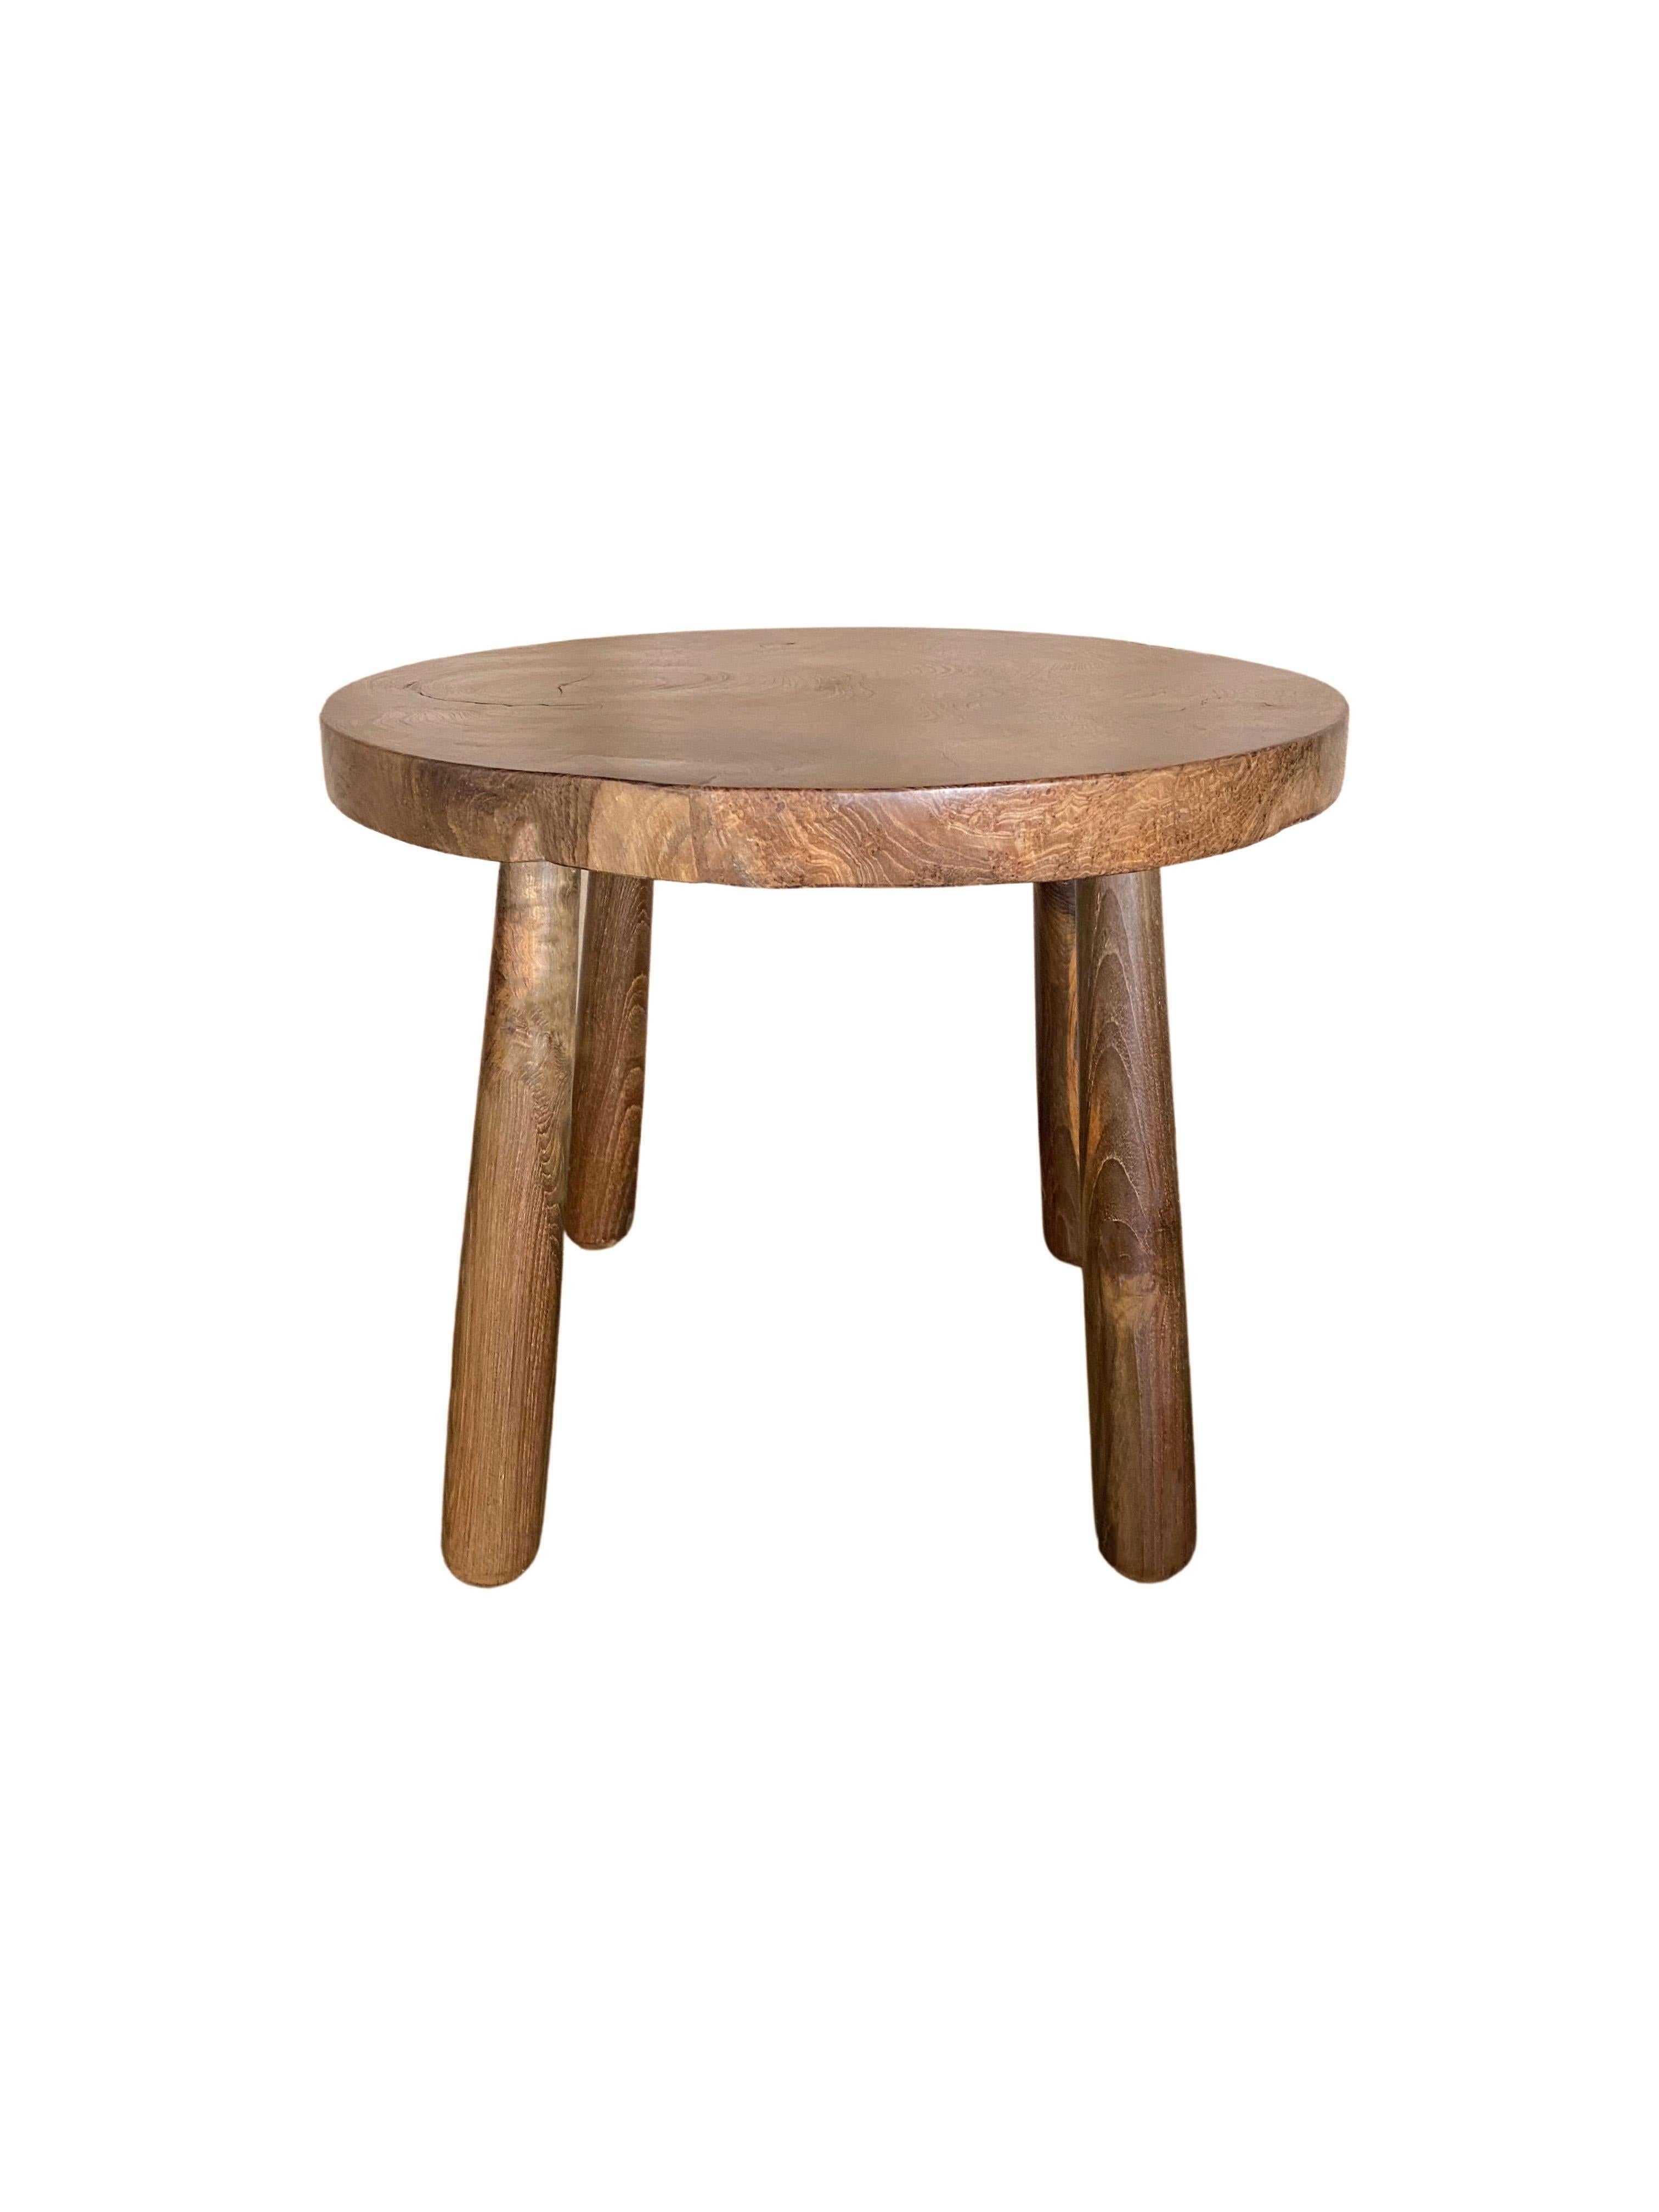 A sculptural teak wood side table which features an incredible teak burl wood patterning on the table top. Carved from a single block of wood to find teak patterning as intricate as this is hard to come by. The table feature four curved legs that